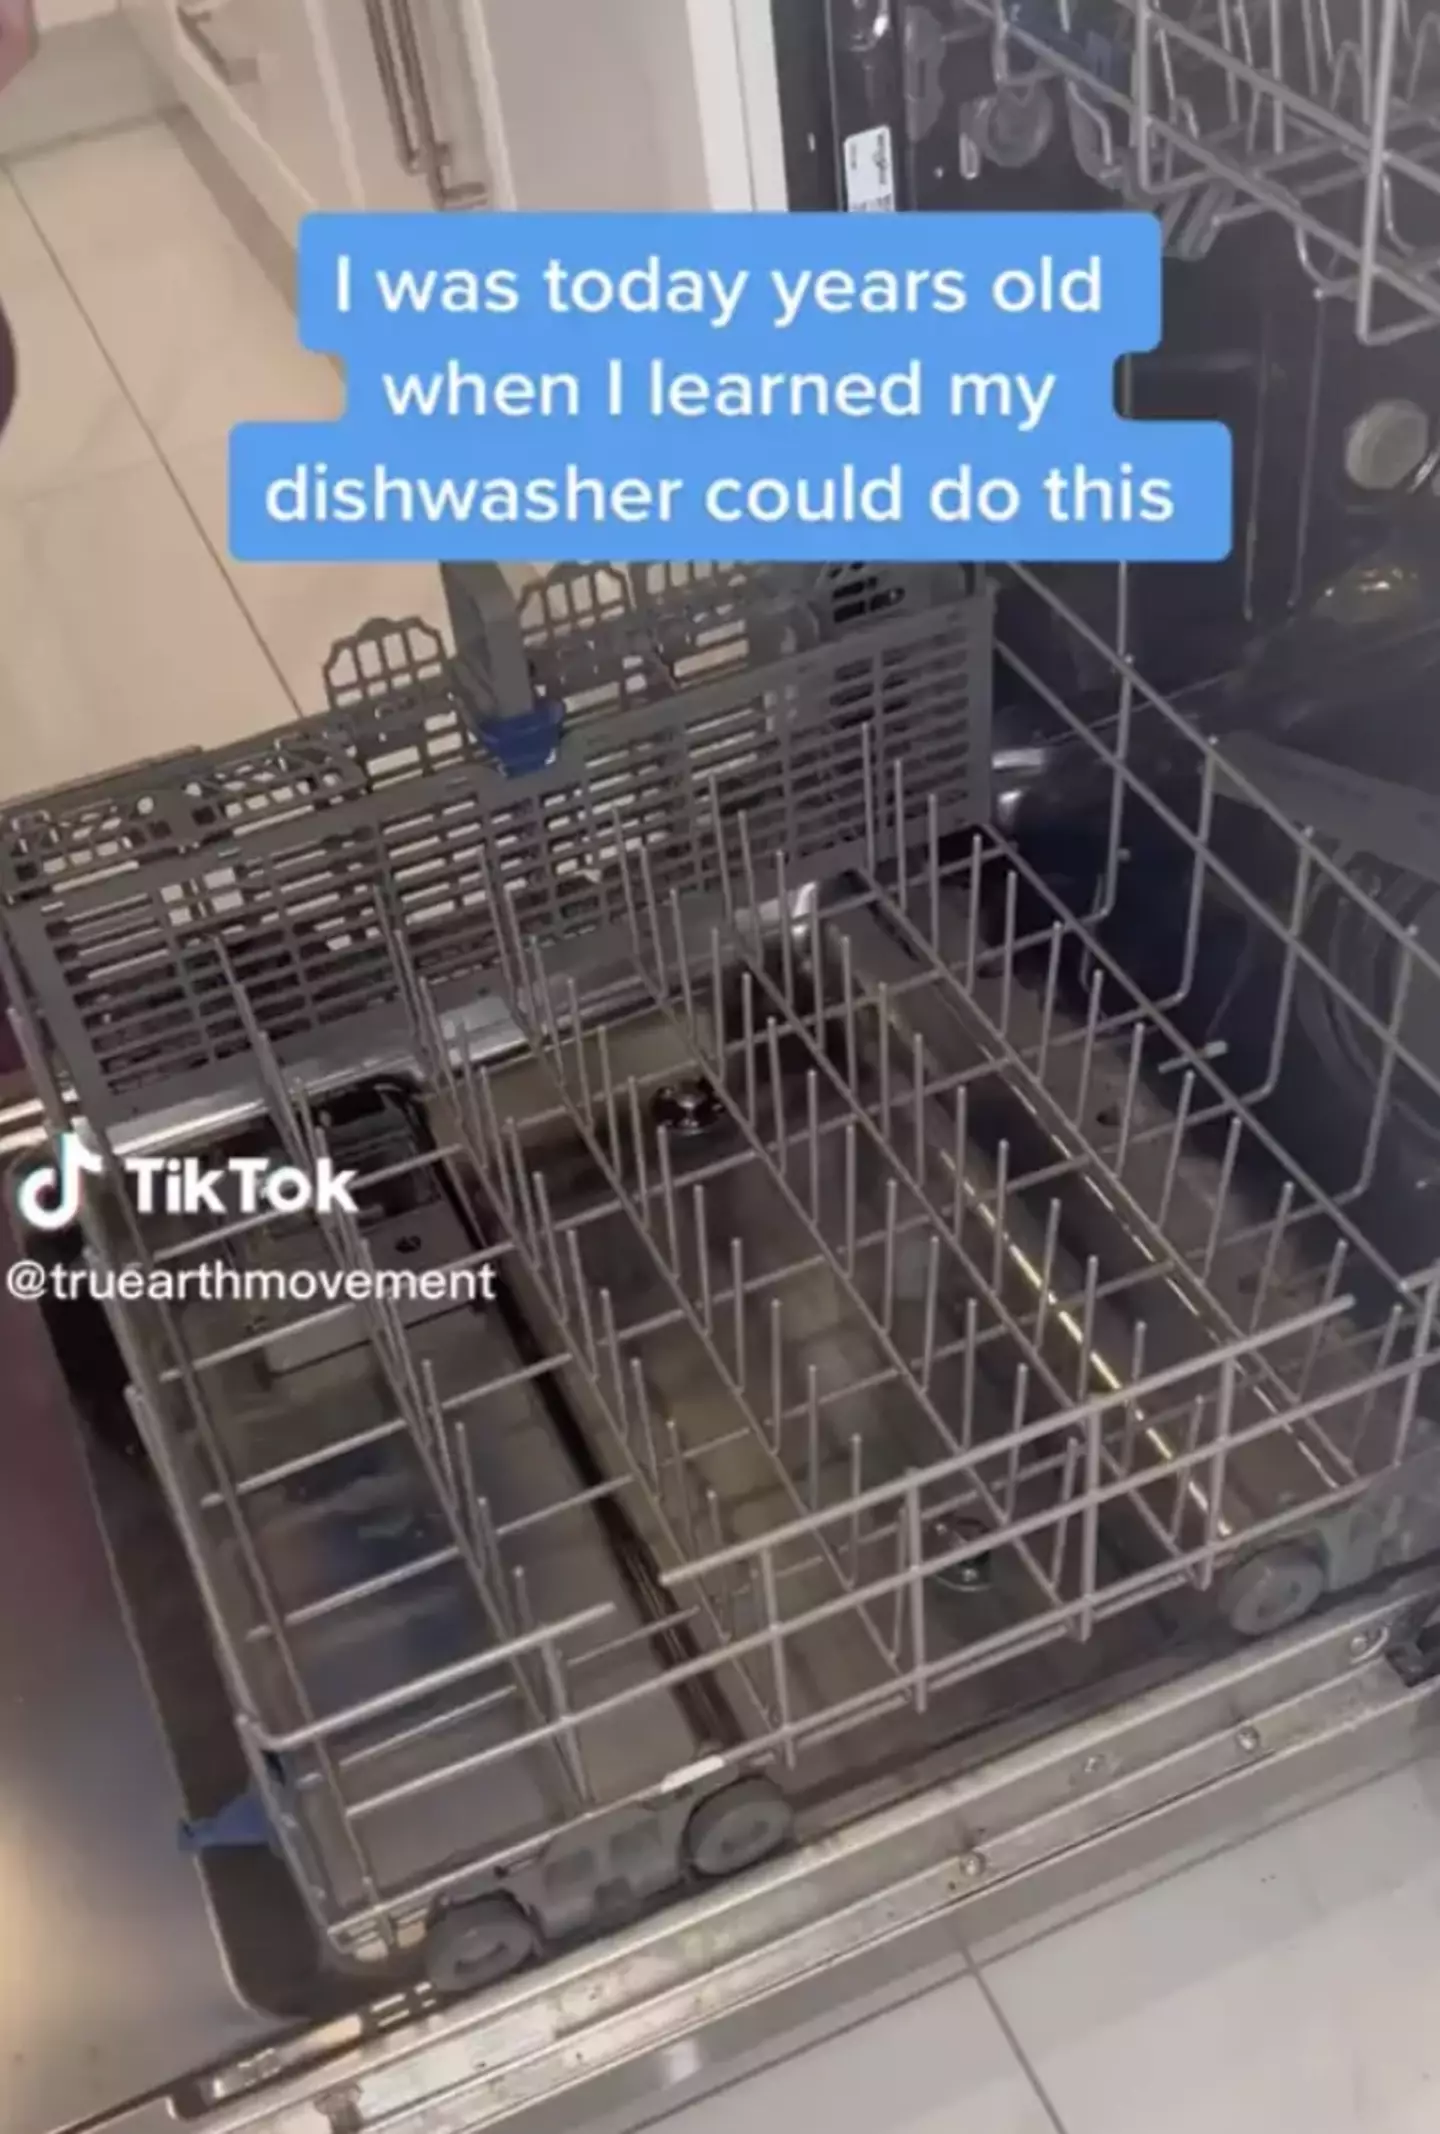 Your dishwasher could be more spacious than you might think.